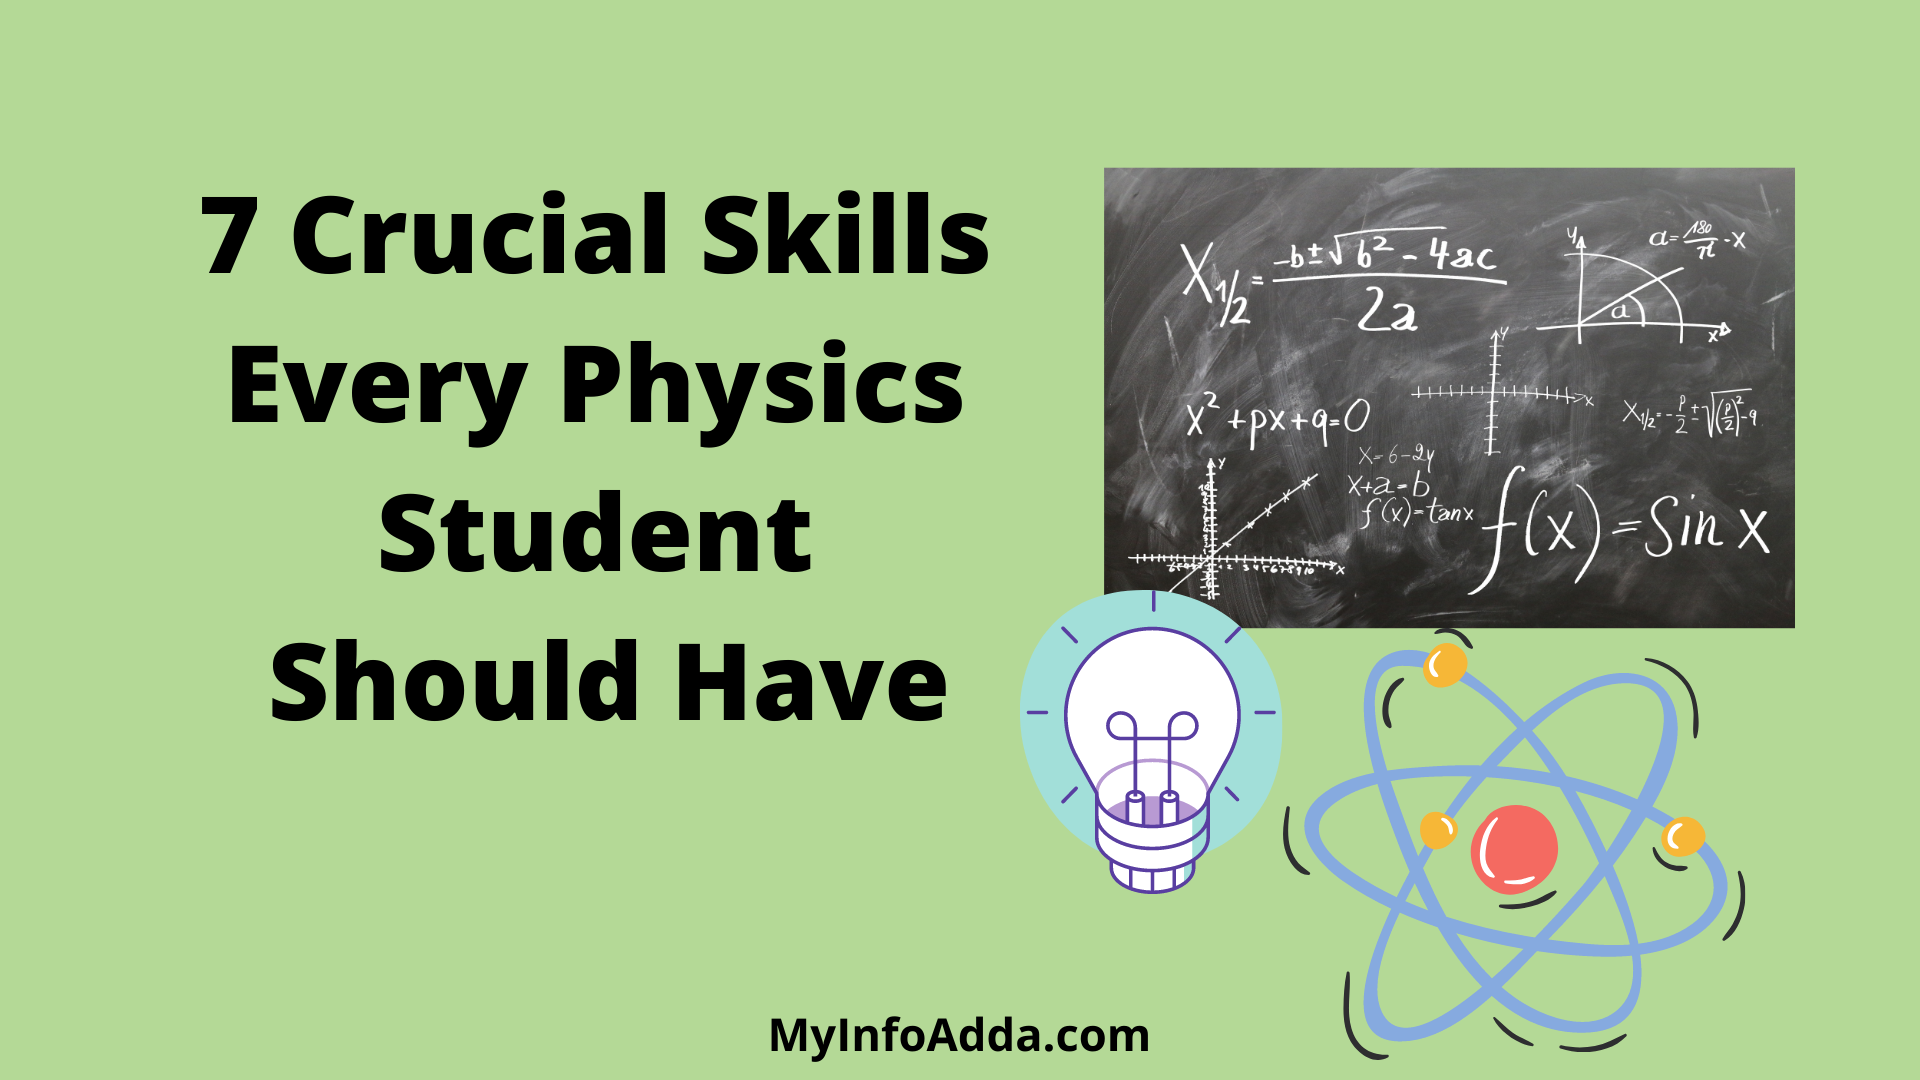 7 Crucial Skills Every Physics Student Should Have